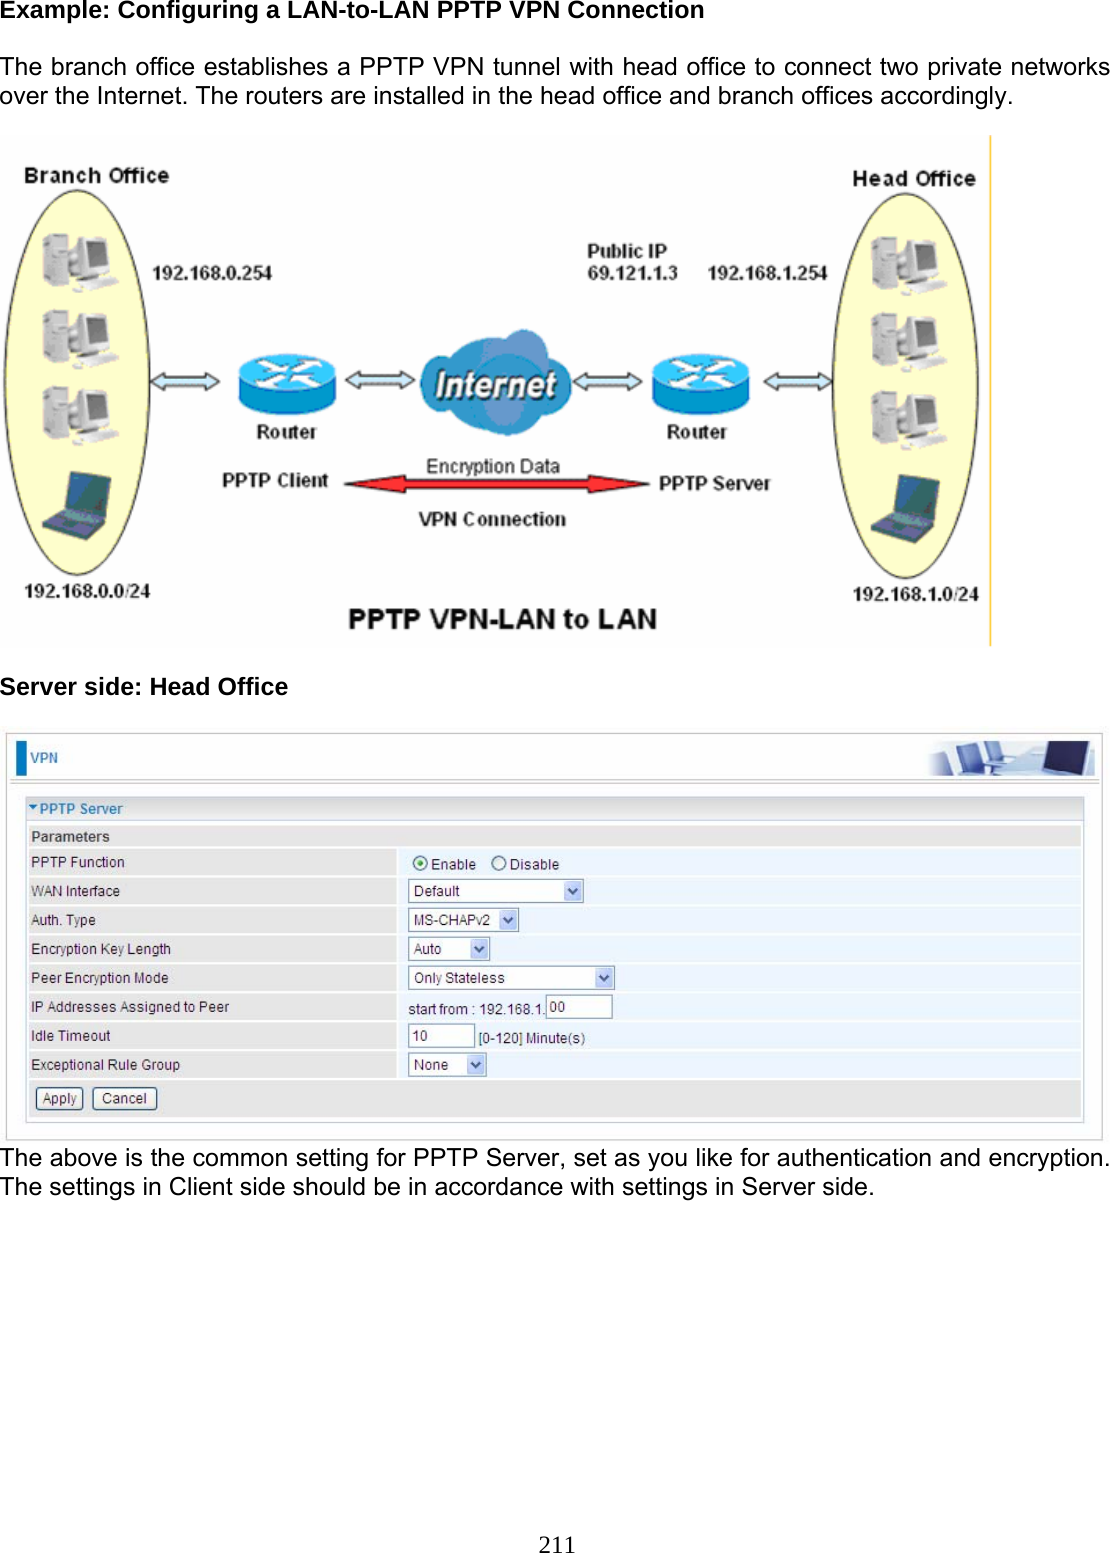 211 Example: Configuring a LAN-to-LAN PPTP VPN Connection  The branch office establishes a PPTP VPN tunnel with head office to connect two private networks over the Internet. The routers are installed in the head office and branch offices accordingly.    Server side: Head Office   The above is the common setting for PPTP Server, set as you like for authentication and encryption. The settings in Client side should be in accordance with settings in Server side.         